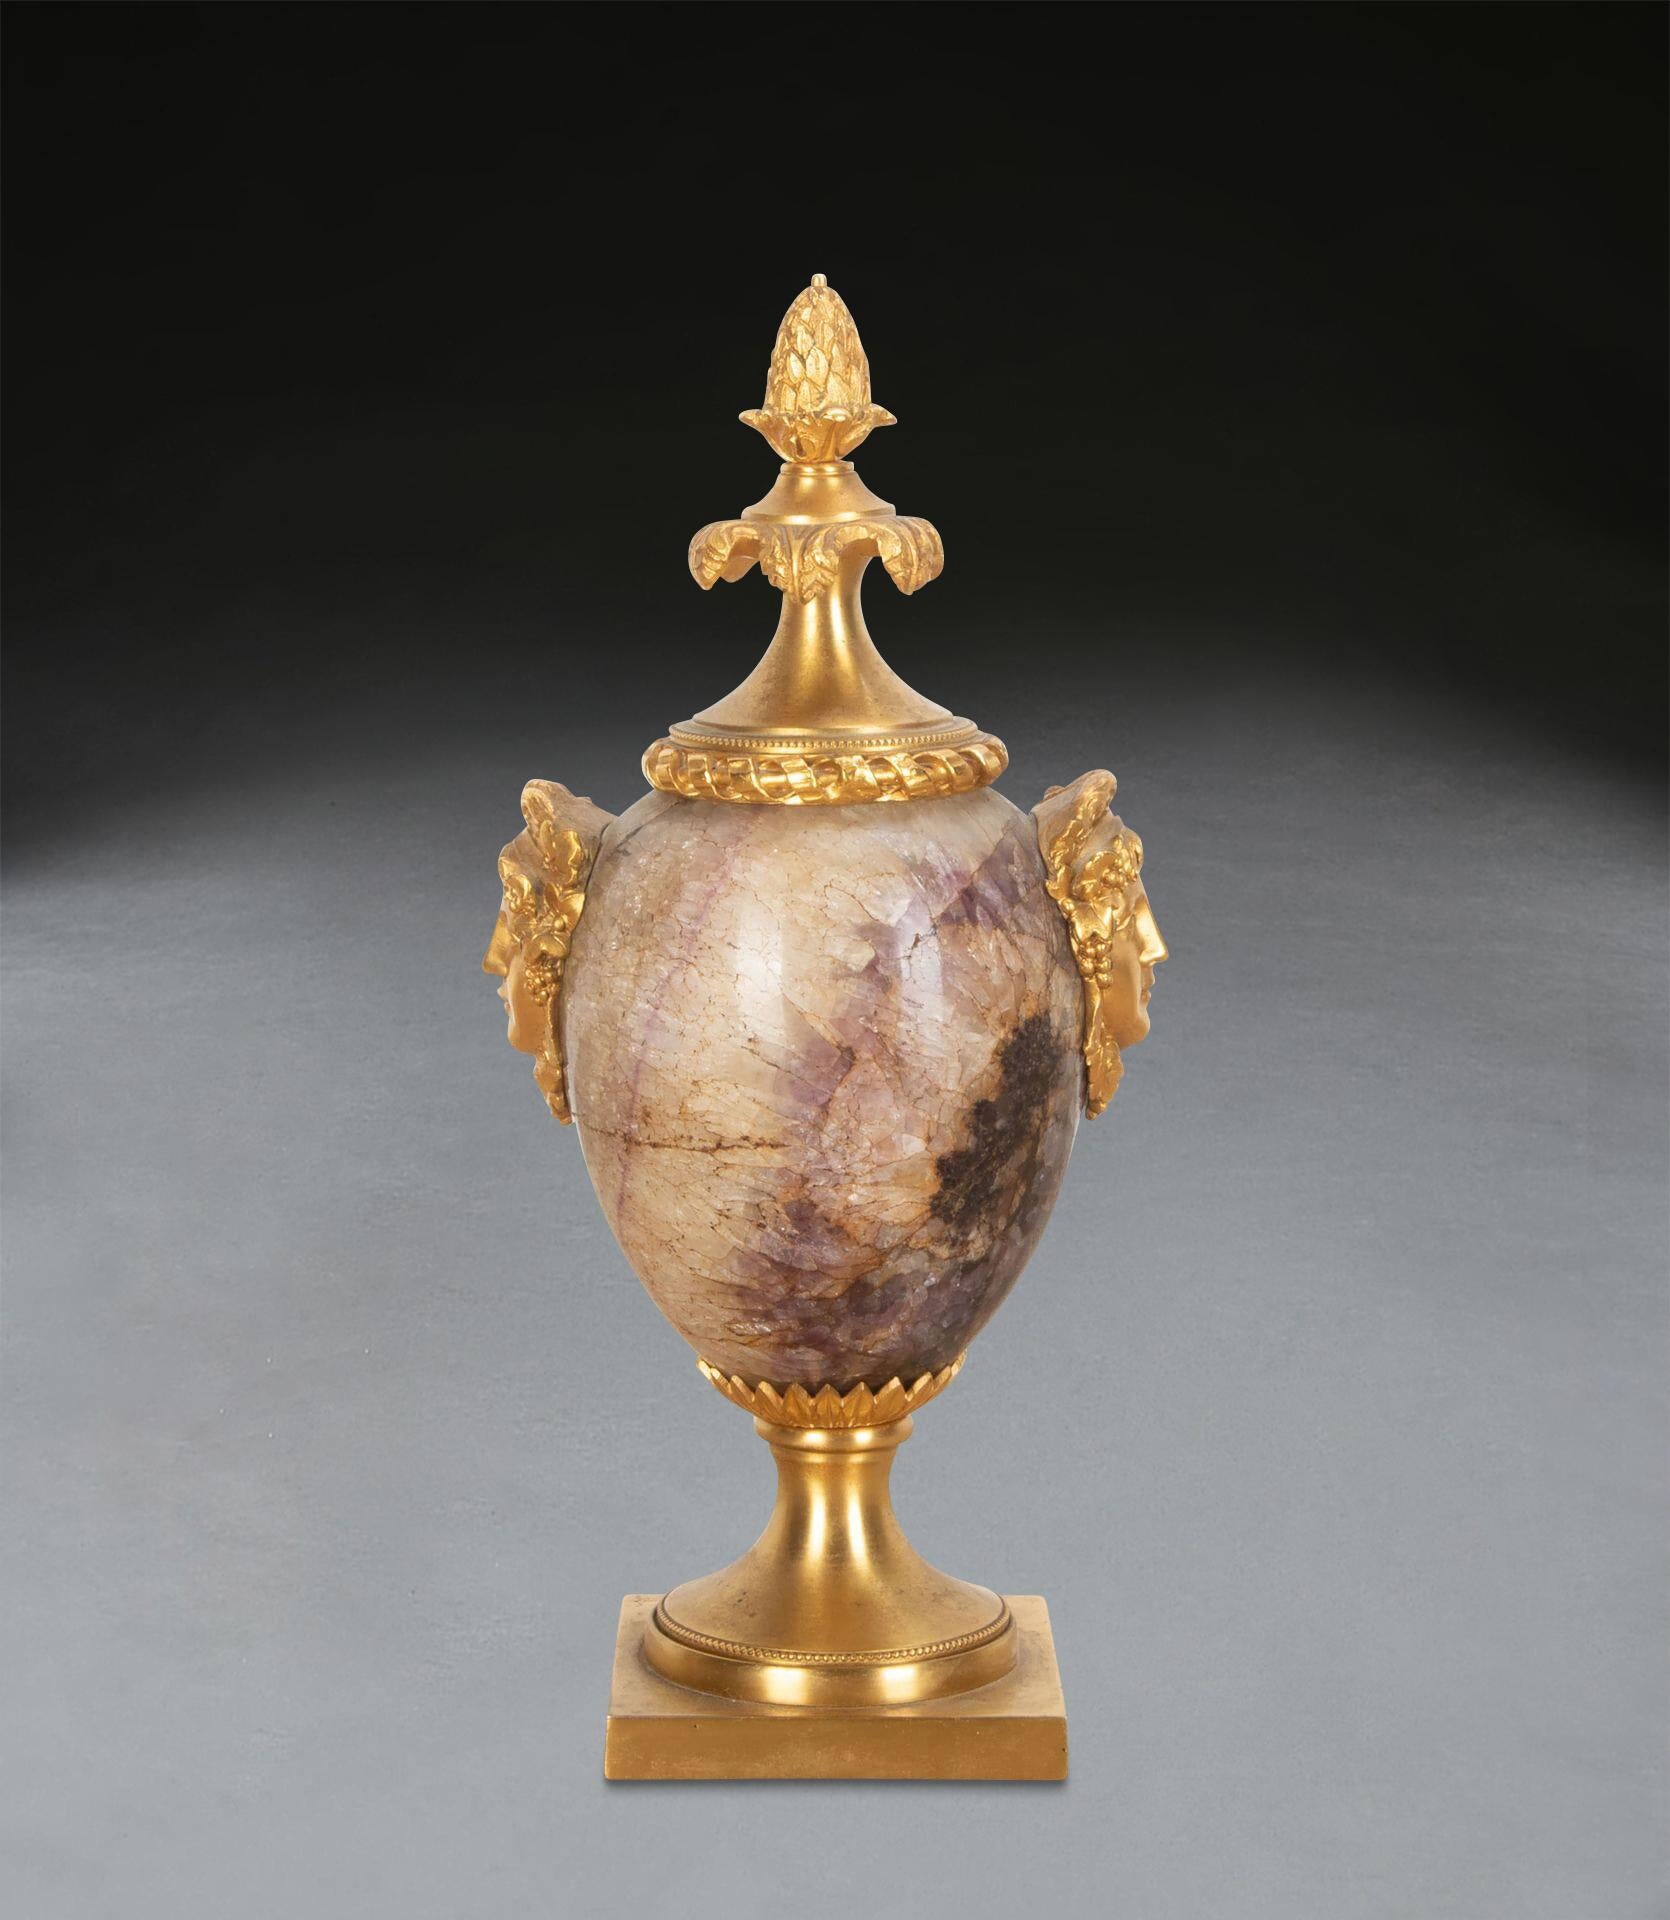 ﻿ A wonderful late C18th Ormolu mounted Blue John urn, attributed to the workshop of Matthew Boulton. The acorn finial with rope twist border, above pale veining and rich purple marble, with bold female masks to the sides, over palmette apron with